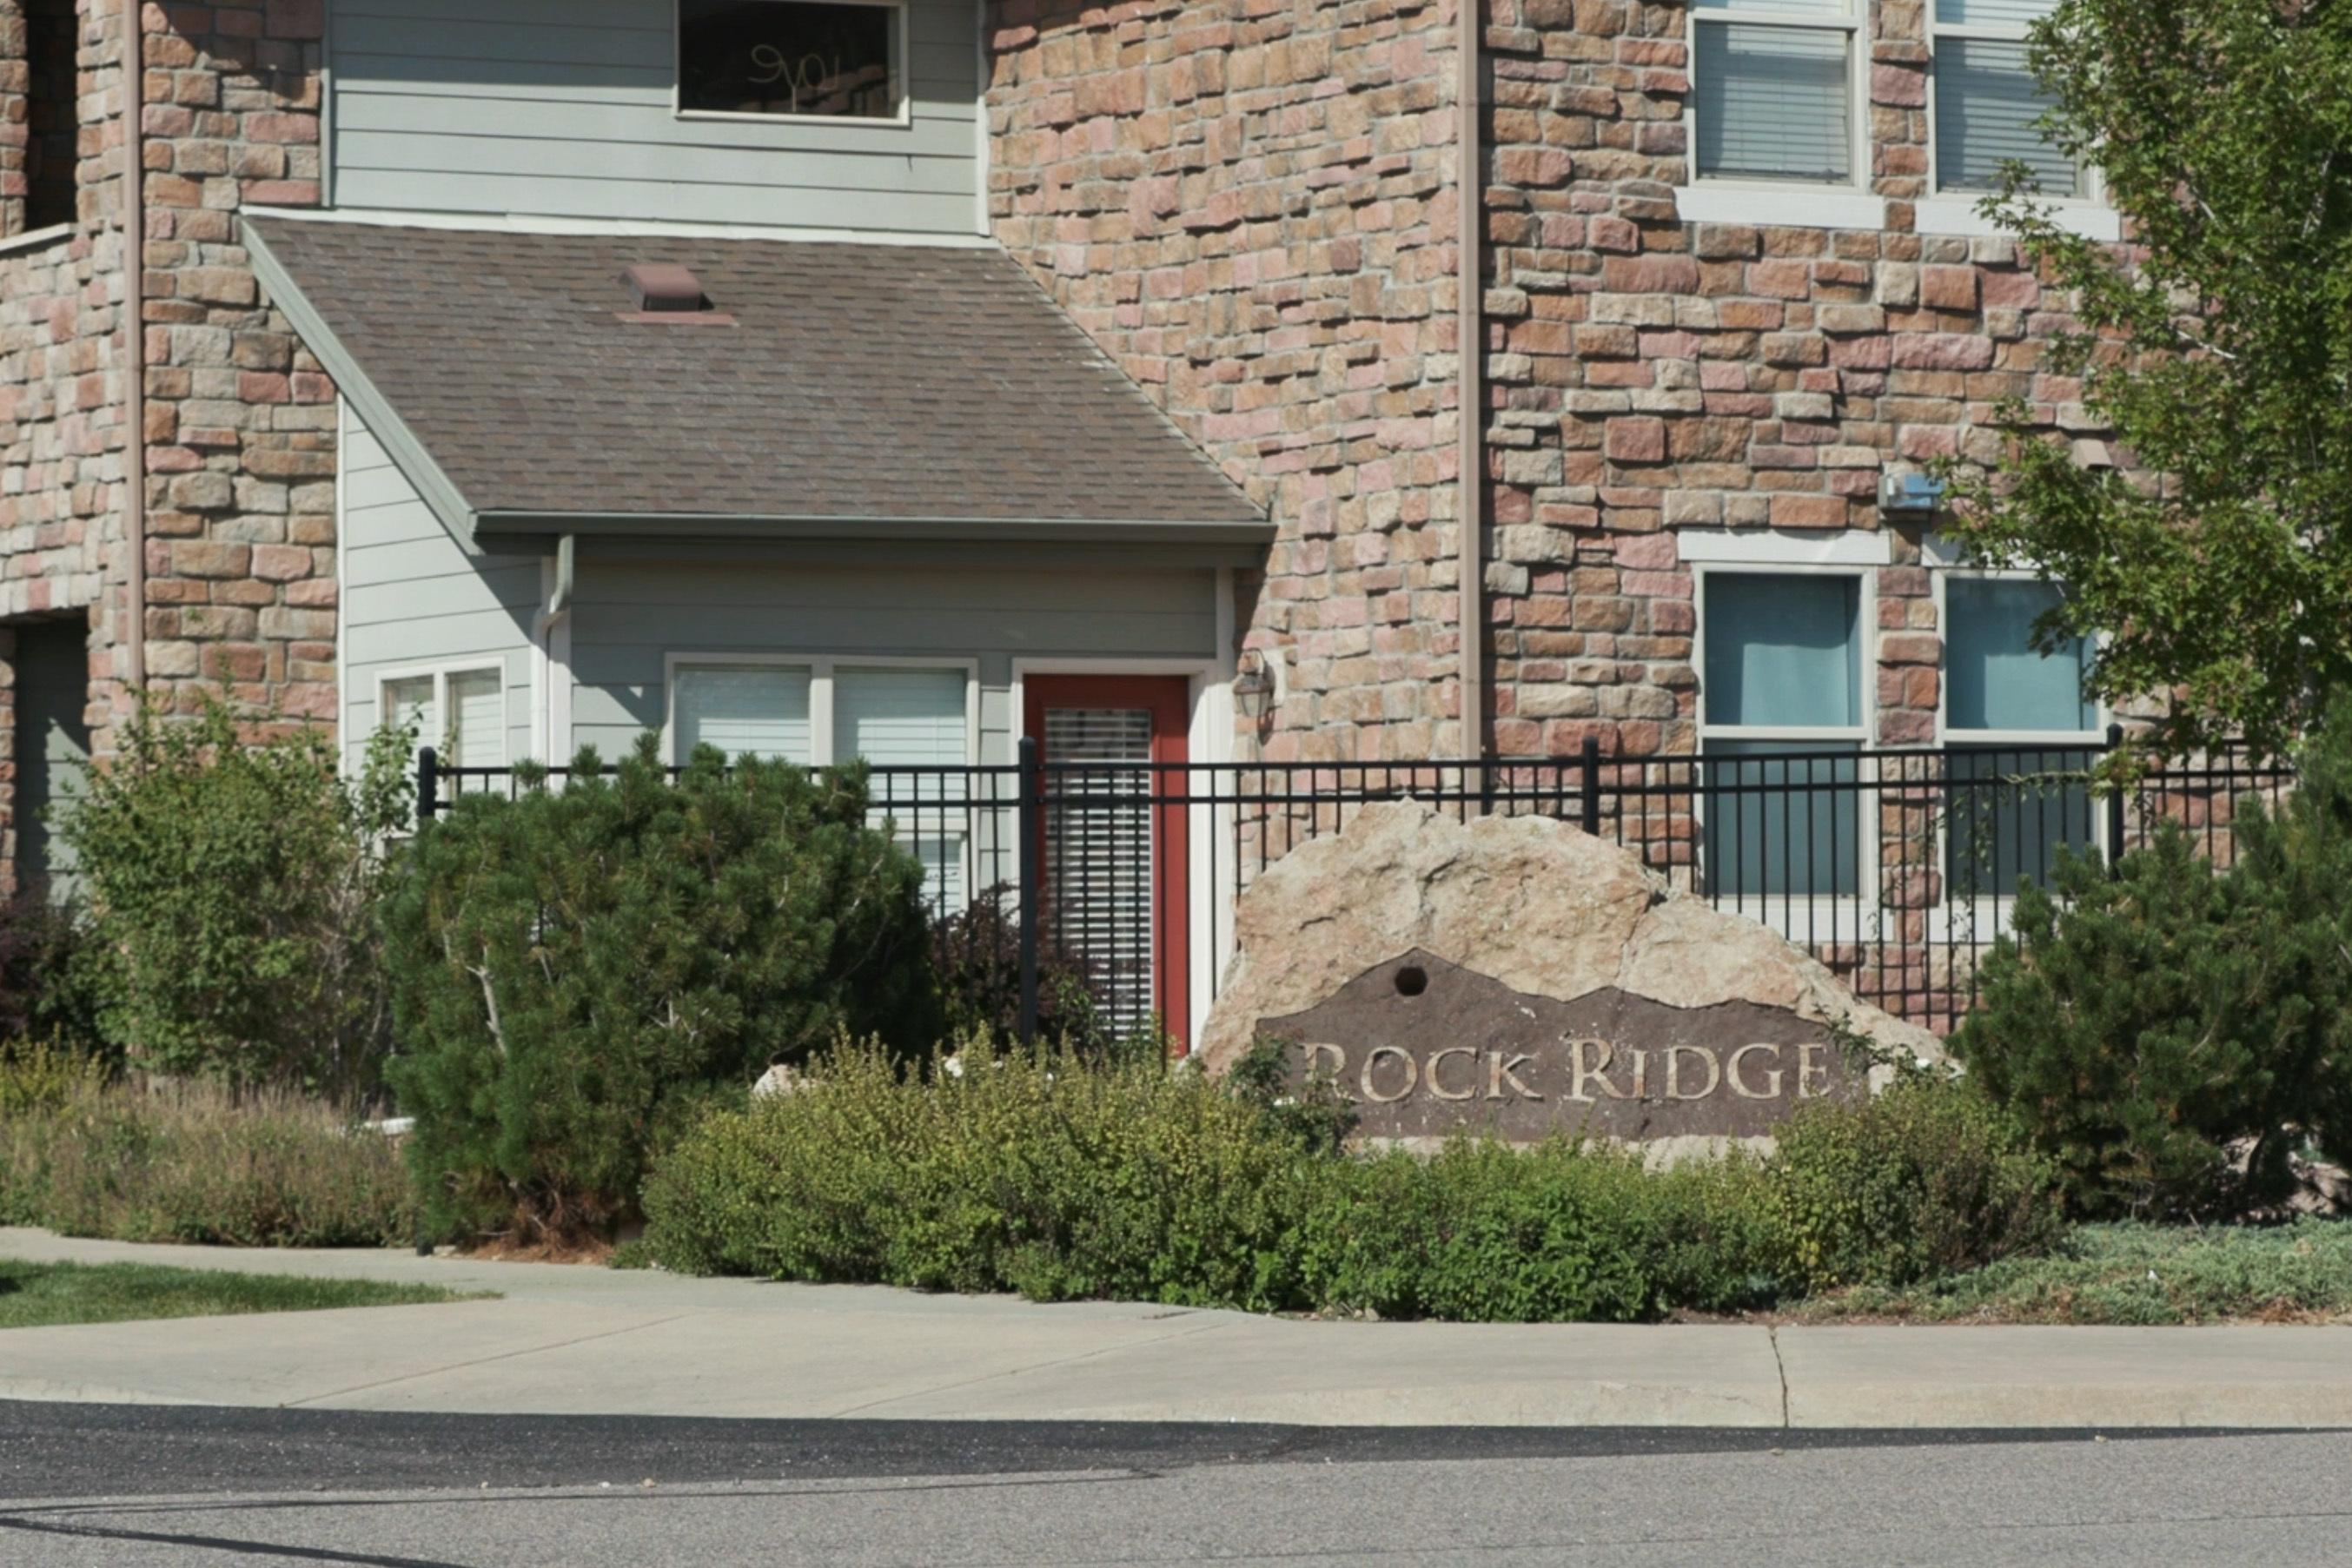 A residential building with a stone facade behind a boulder that says "Rock Ridge."